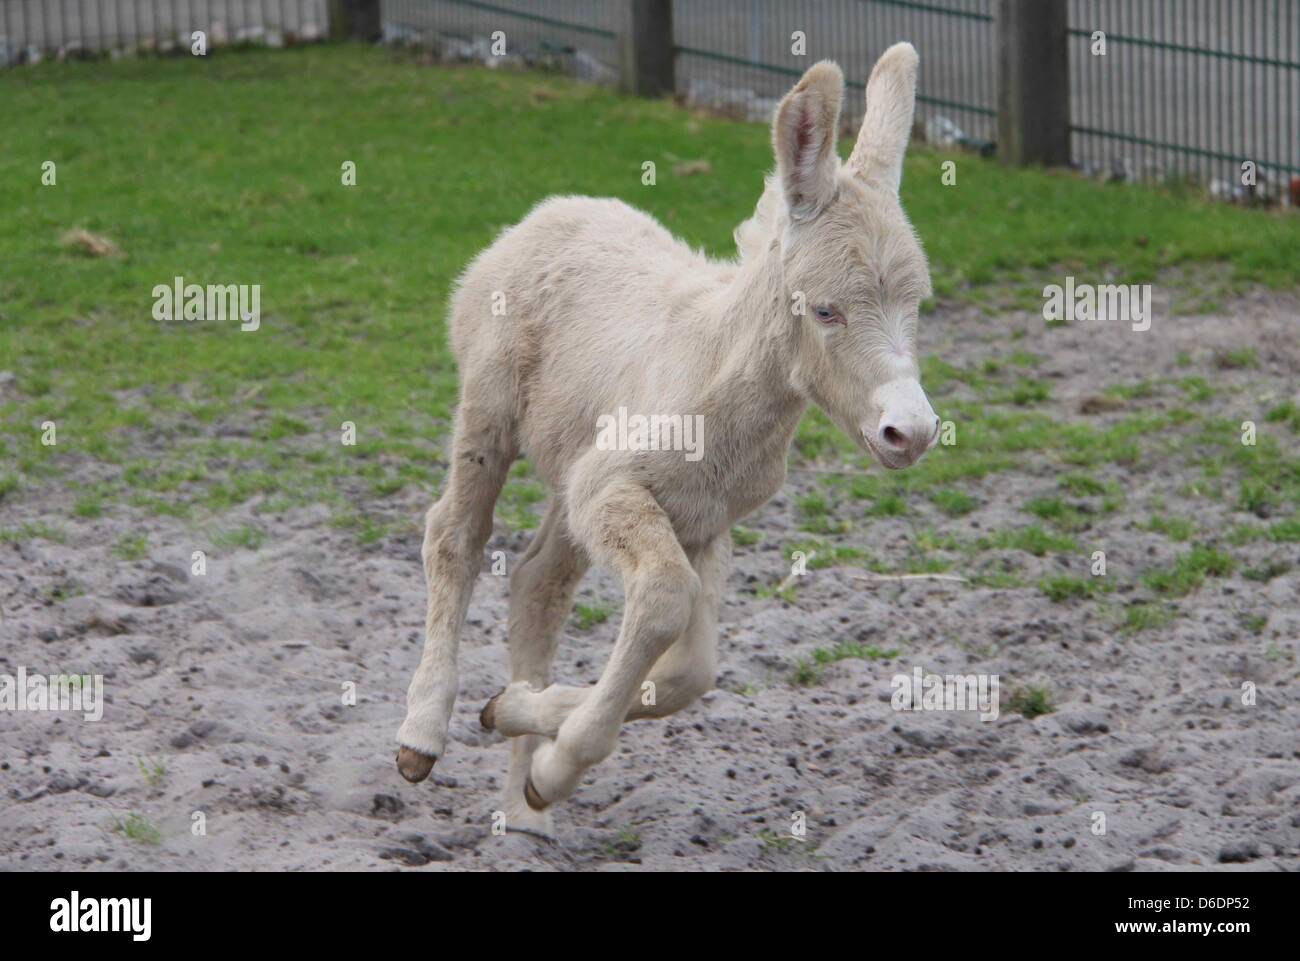 A rare white donkey foal runs around at the West Coast Park in St. Peter-Ording, Germany, 09 September 2012. The young donkey called Alexis was born on 02 September 2012. The so-called 'Baroque Donkey' is critically endangered. Photo: Wolfgang Runge Stock Photo